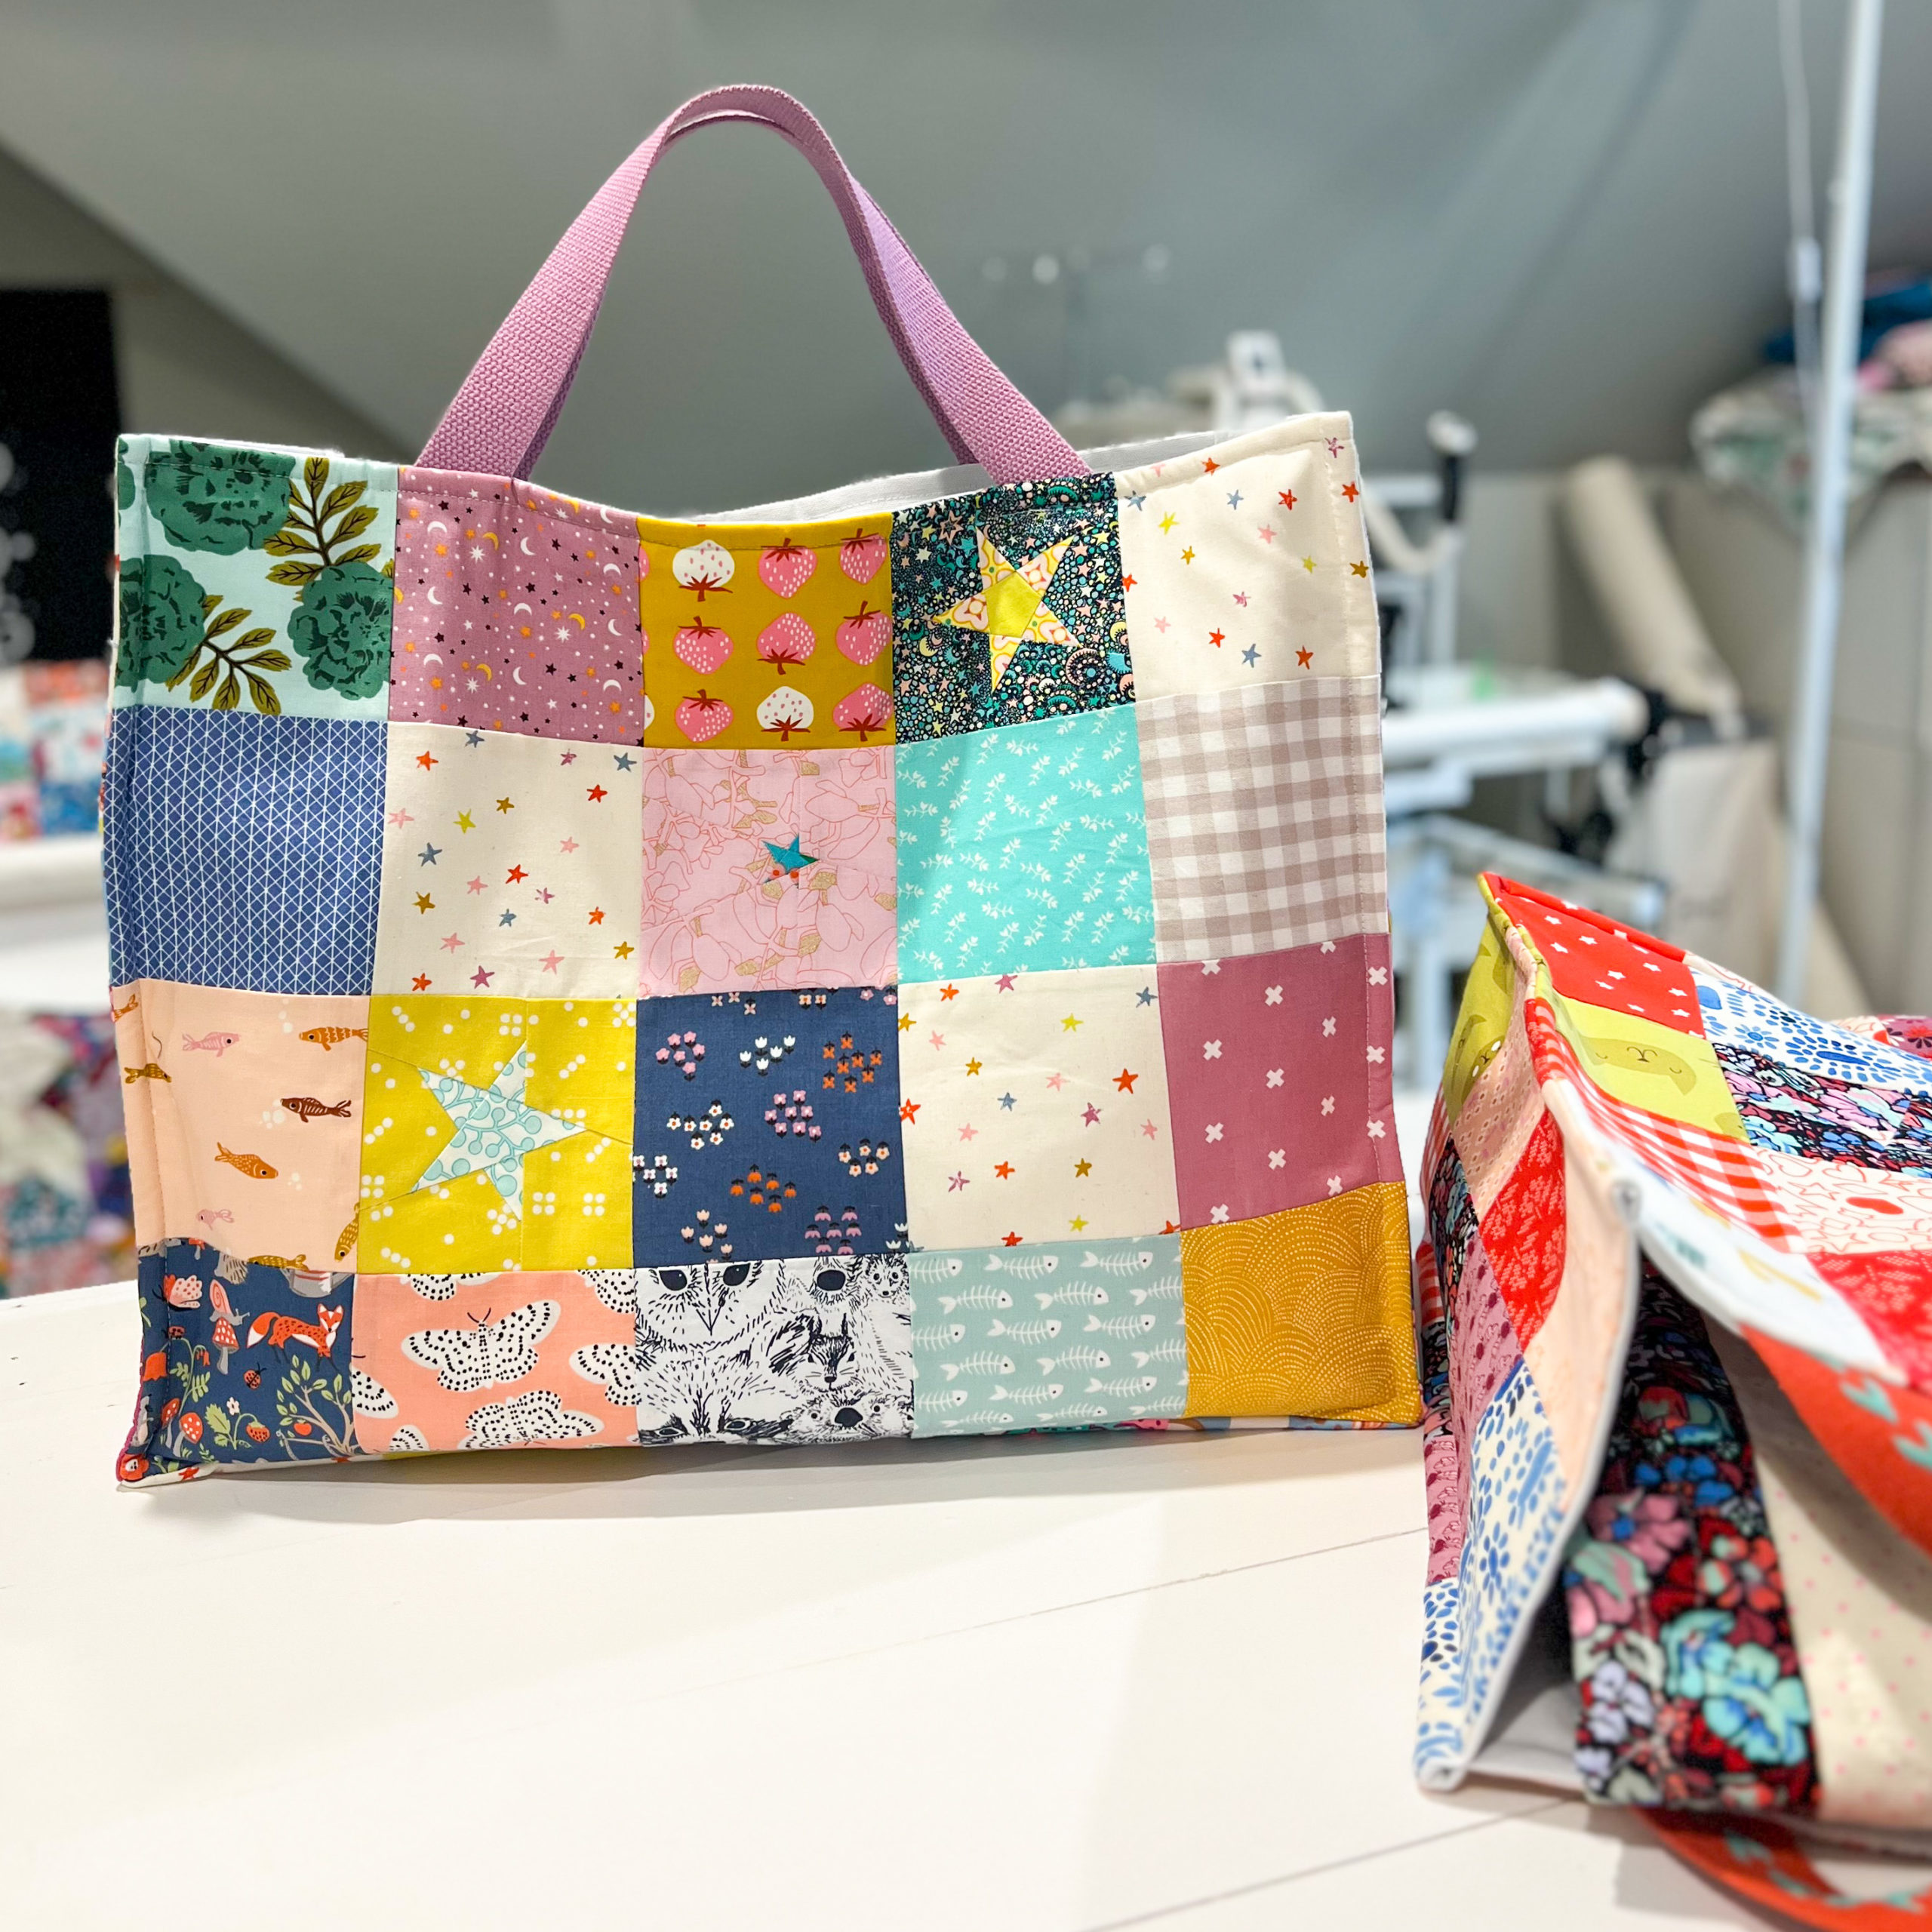 Patchwork Project Bag Tutorial - A Quilting Life